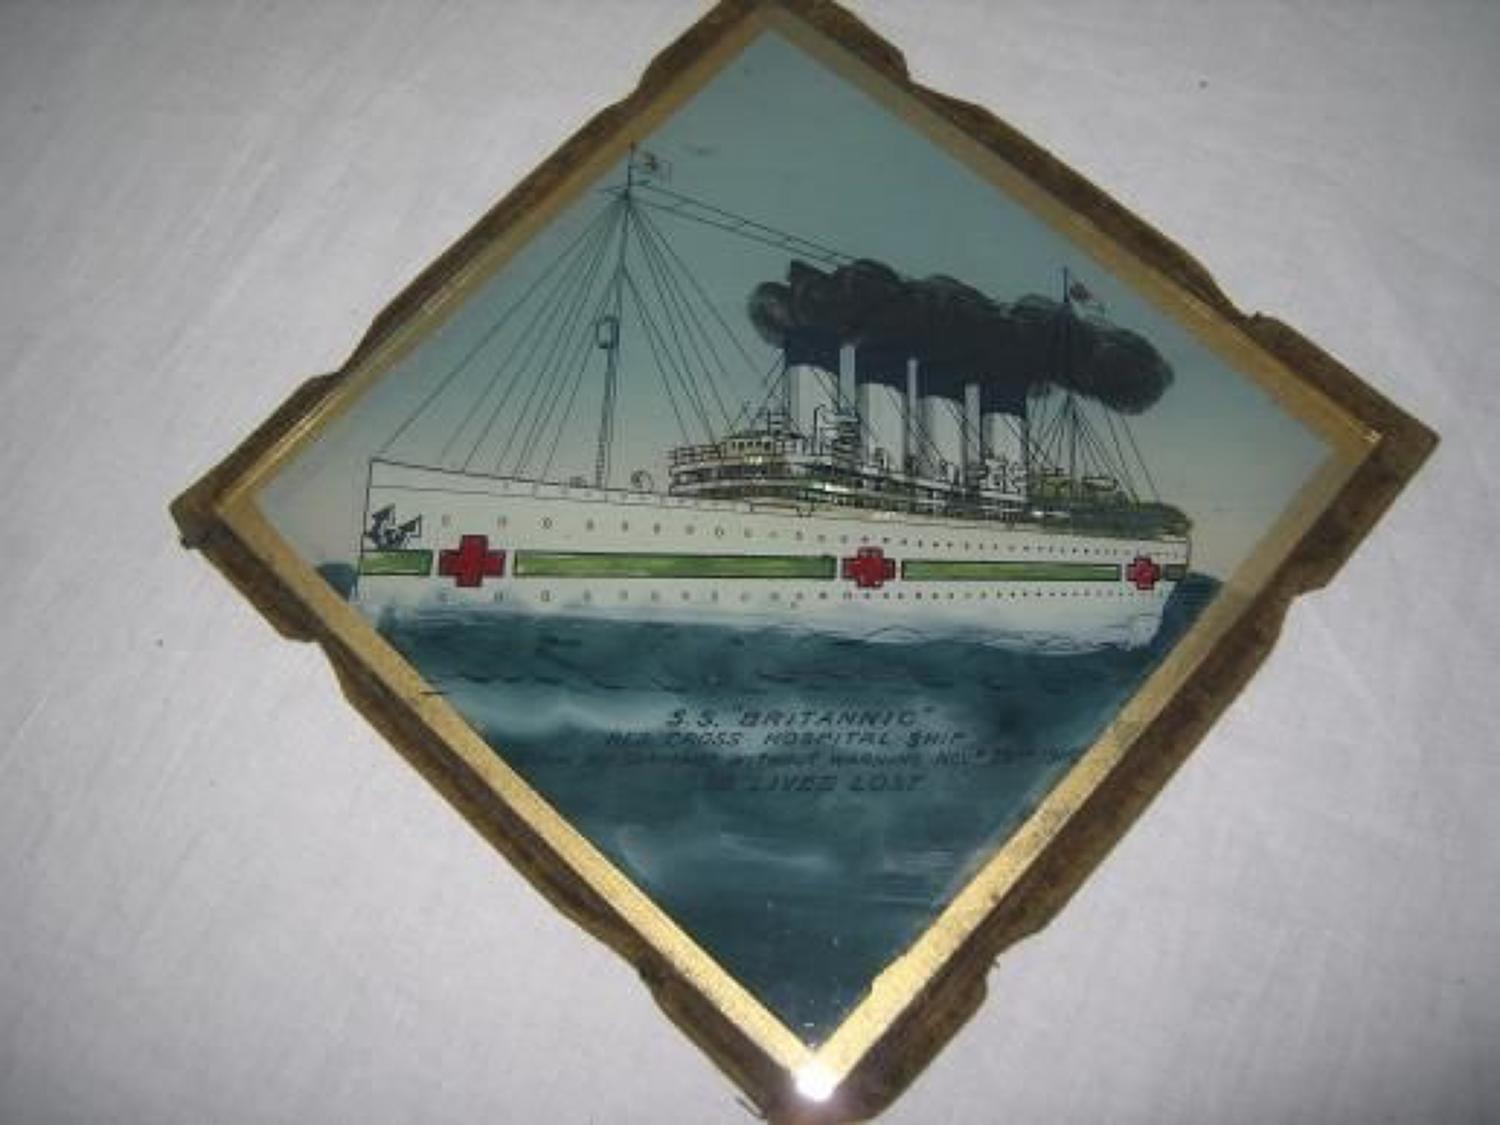 BRITTANIC SISTER TO THE TITANIC HOSPITAL SHIP GLASS PLATE.